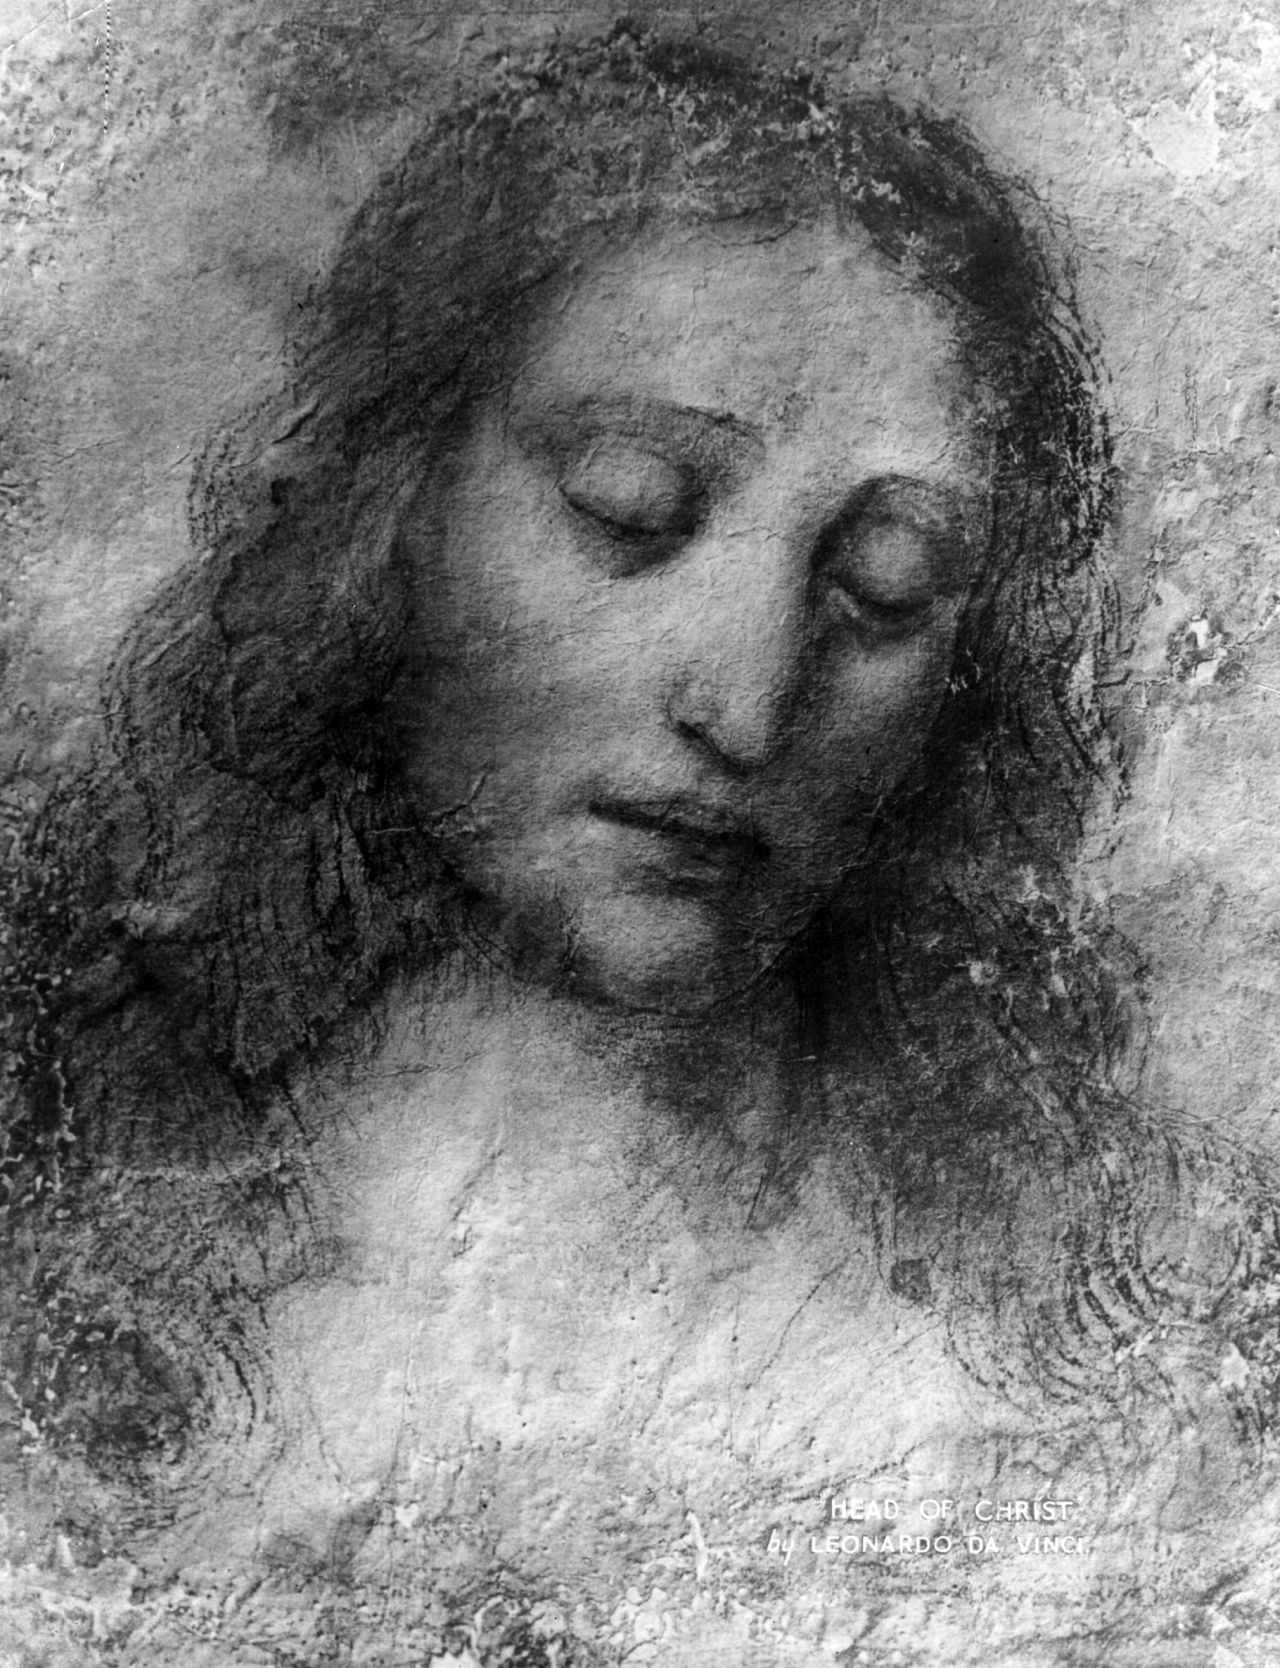 Jesus was also called the "Man of Sorrows," an emotion captured here by Leonardo da Vinci.